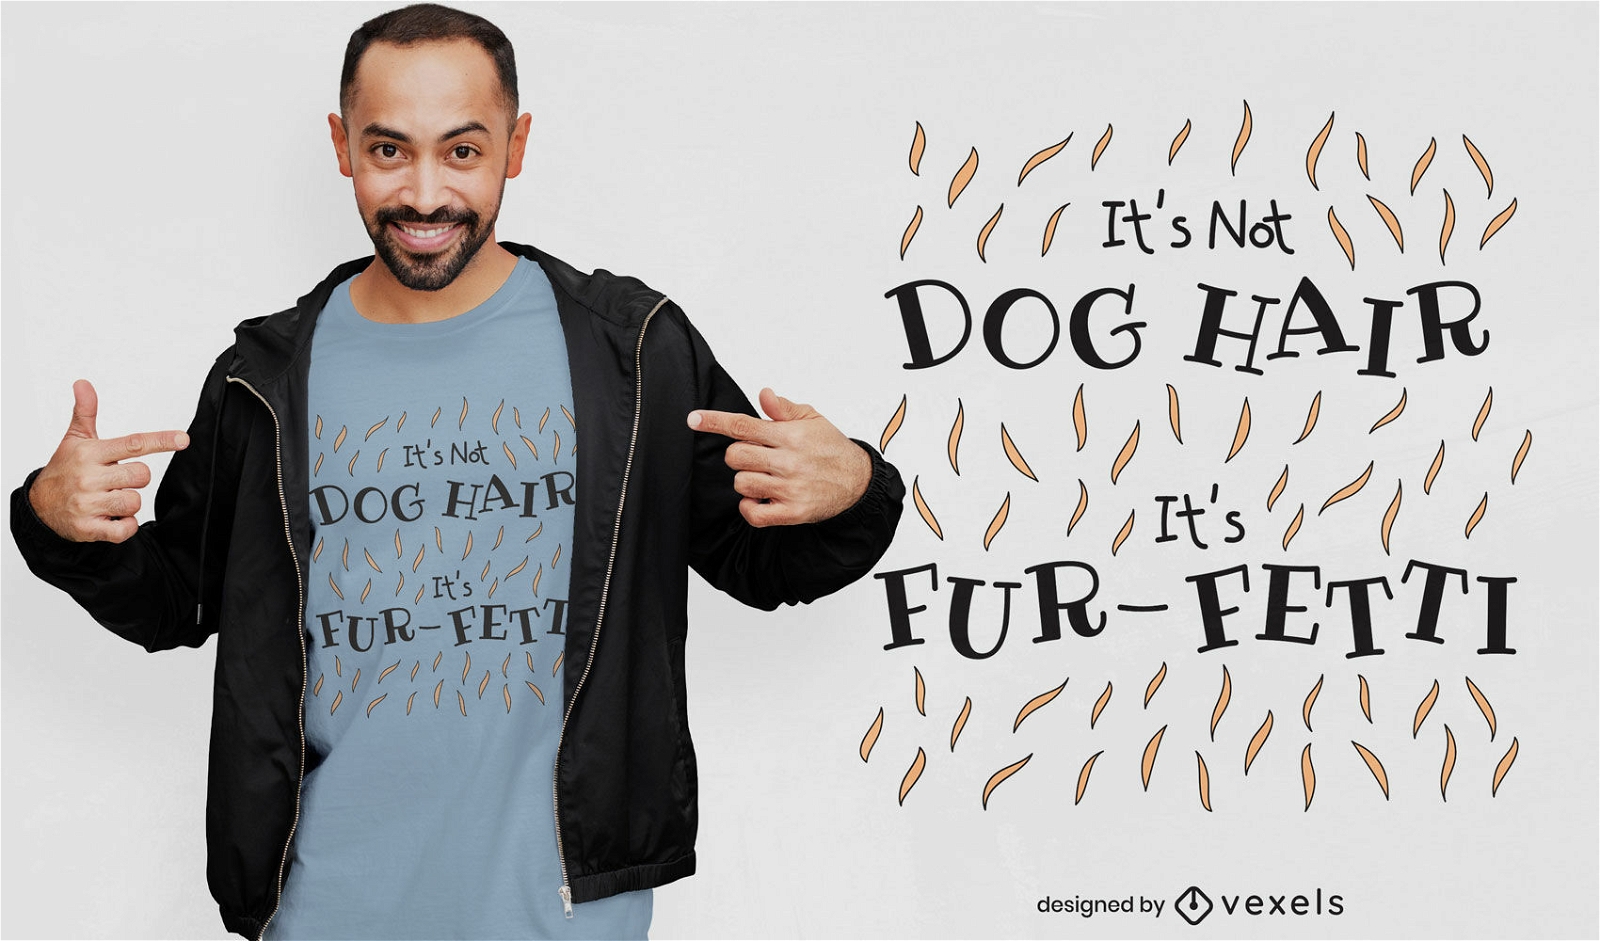 Dog hair funny quote t-shirt design